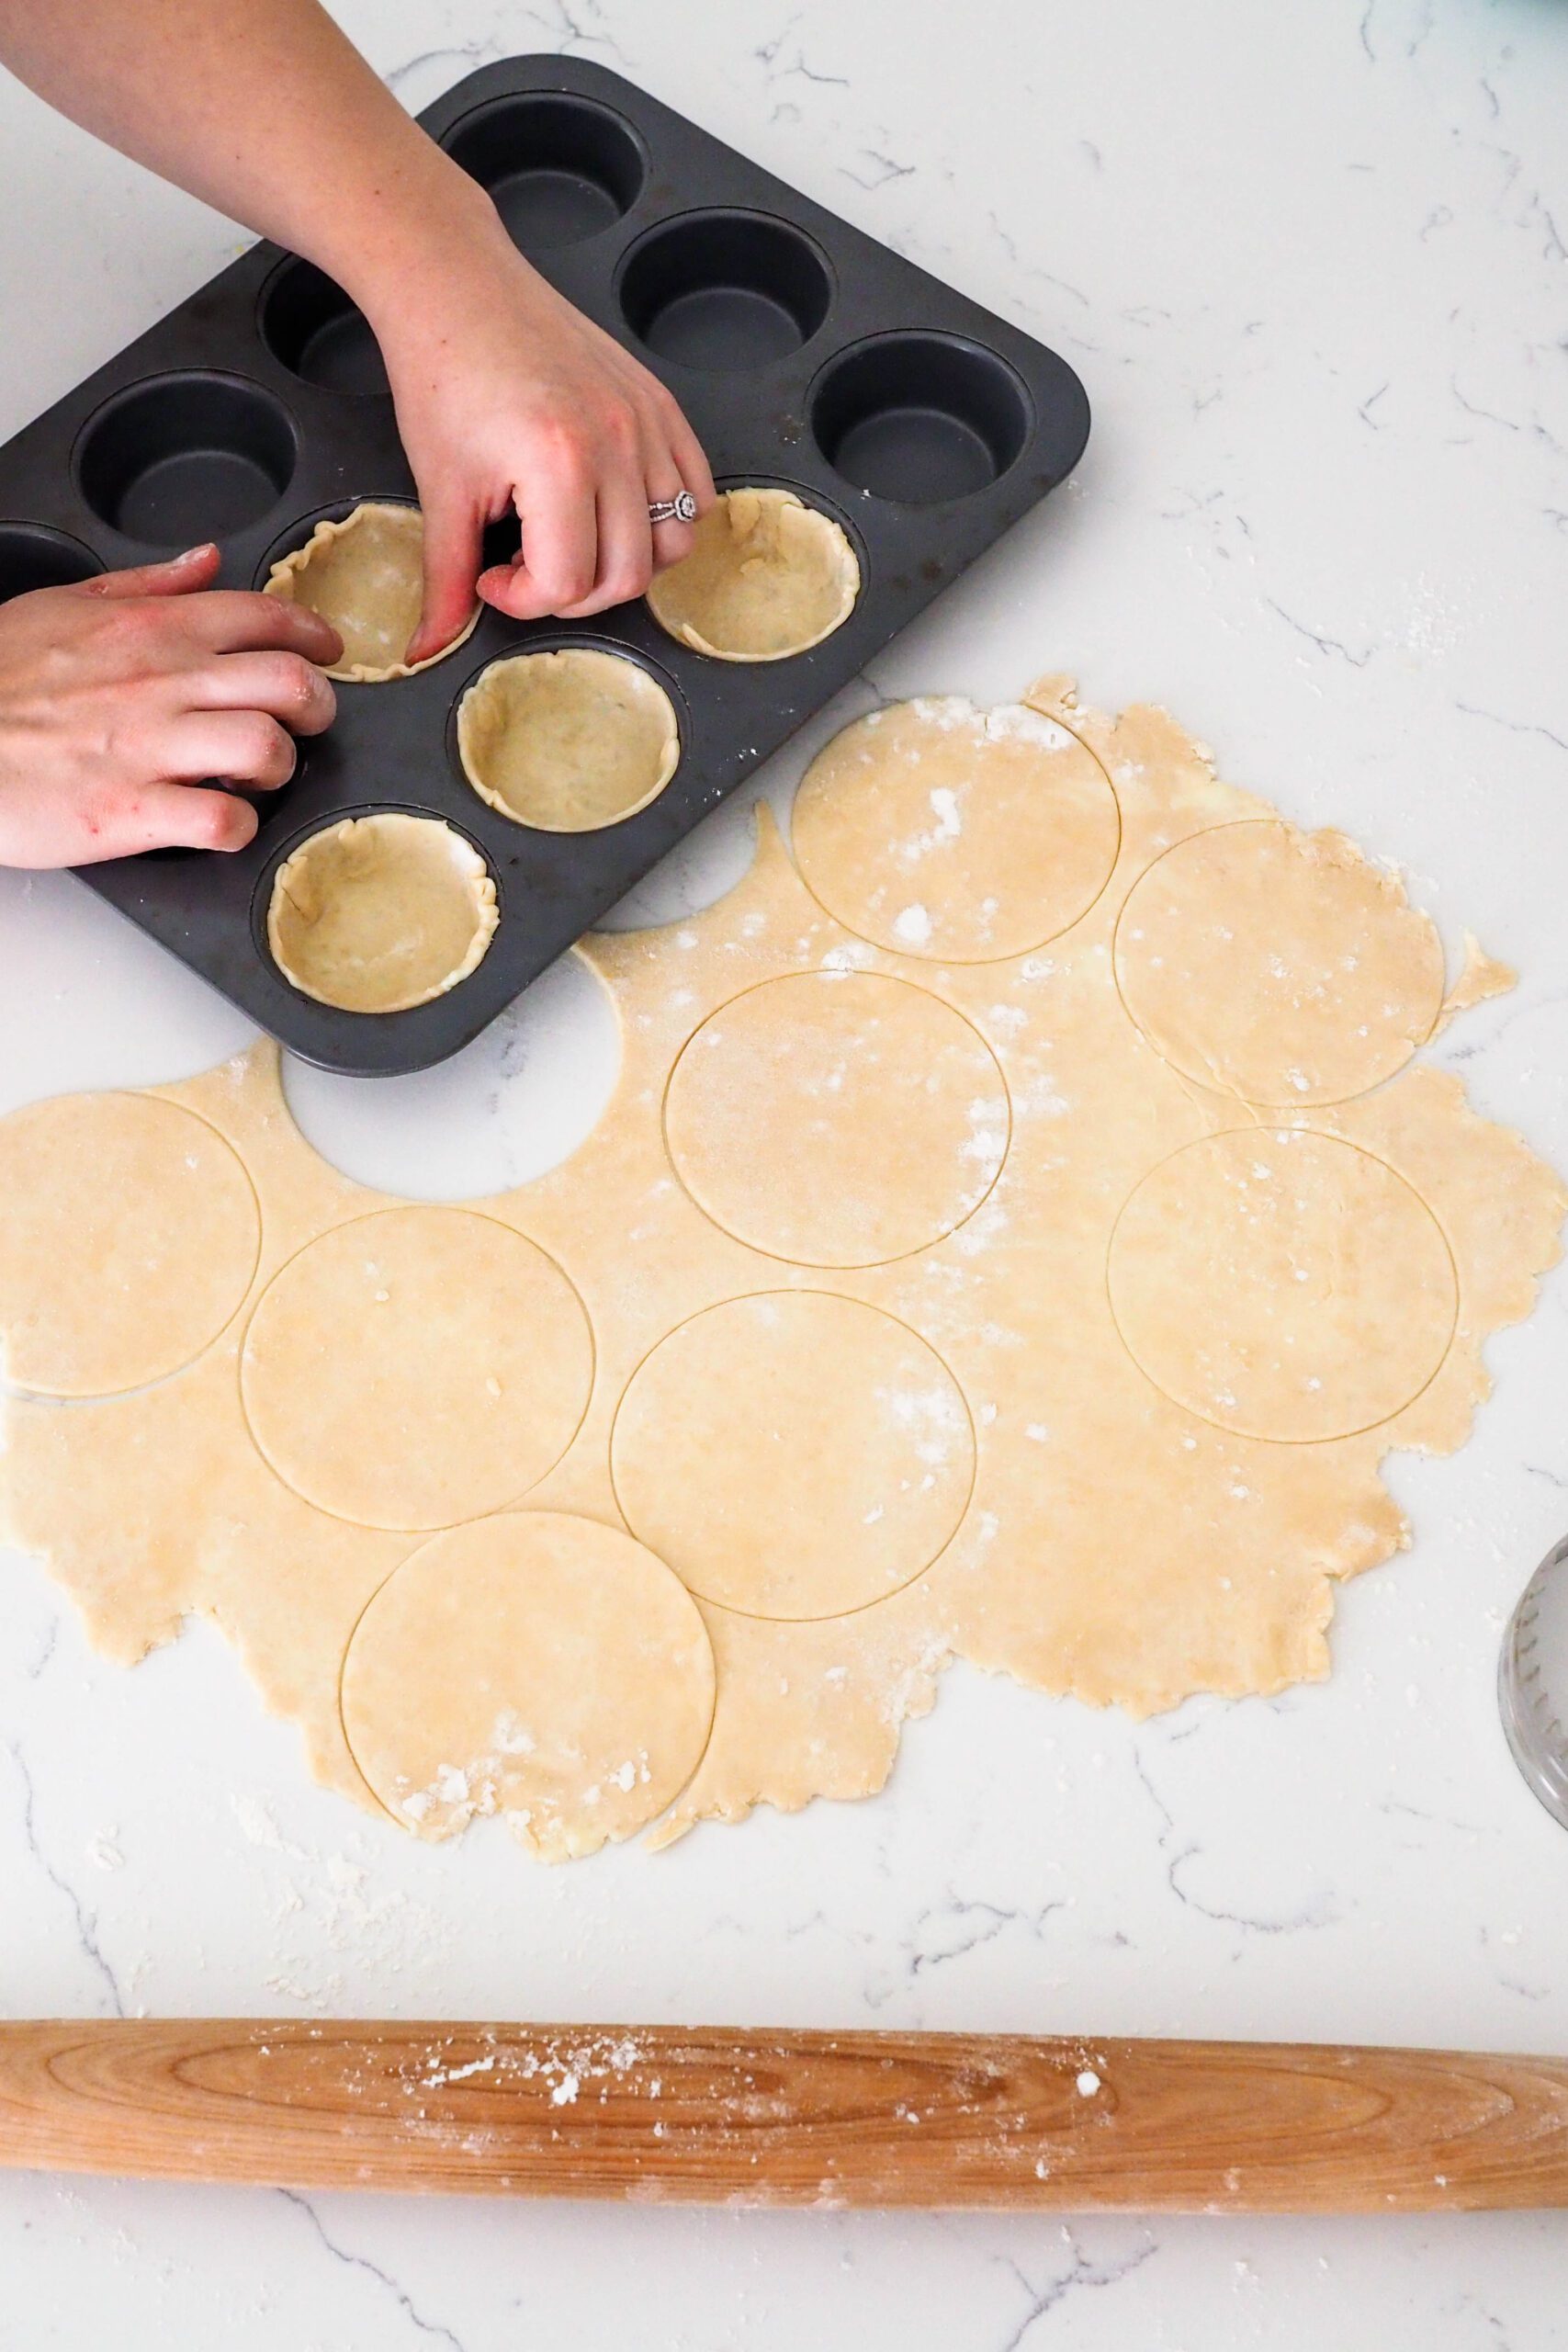 Two hands adjust the edges of a pie dough round in a muffin pan hole.